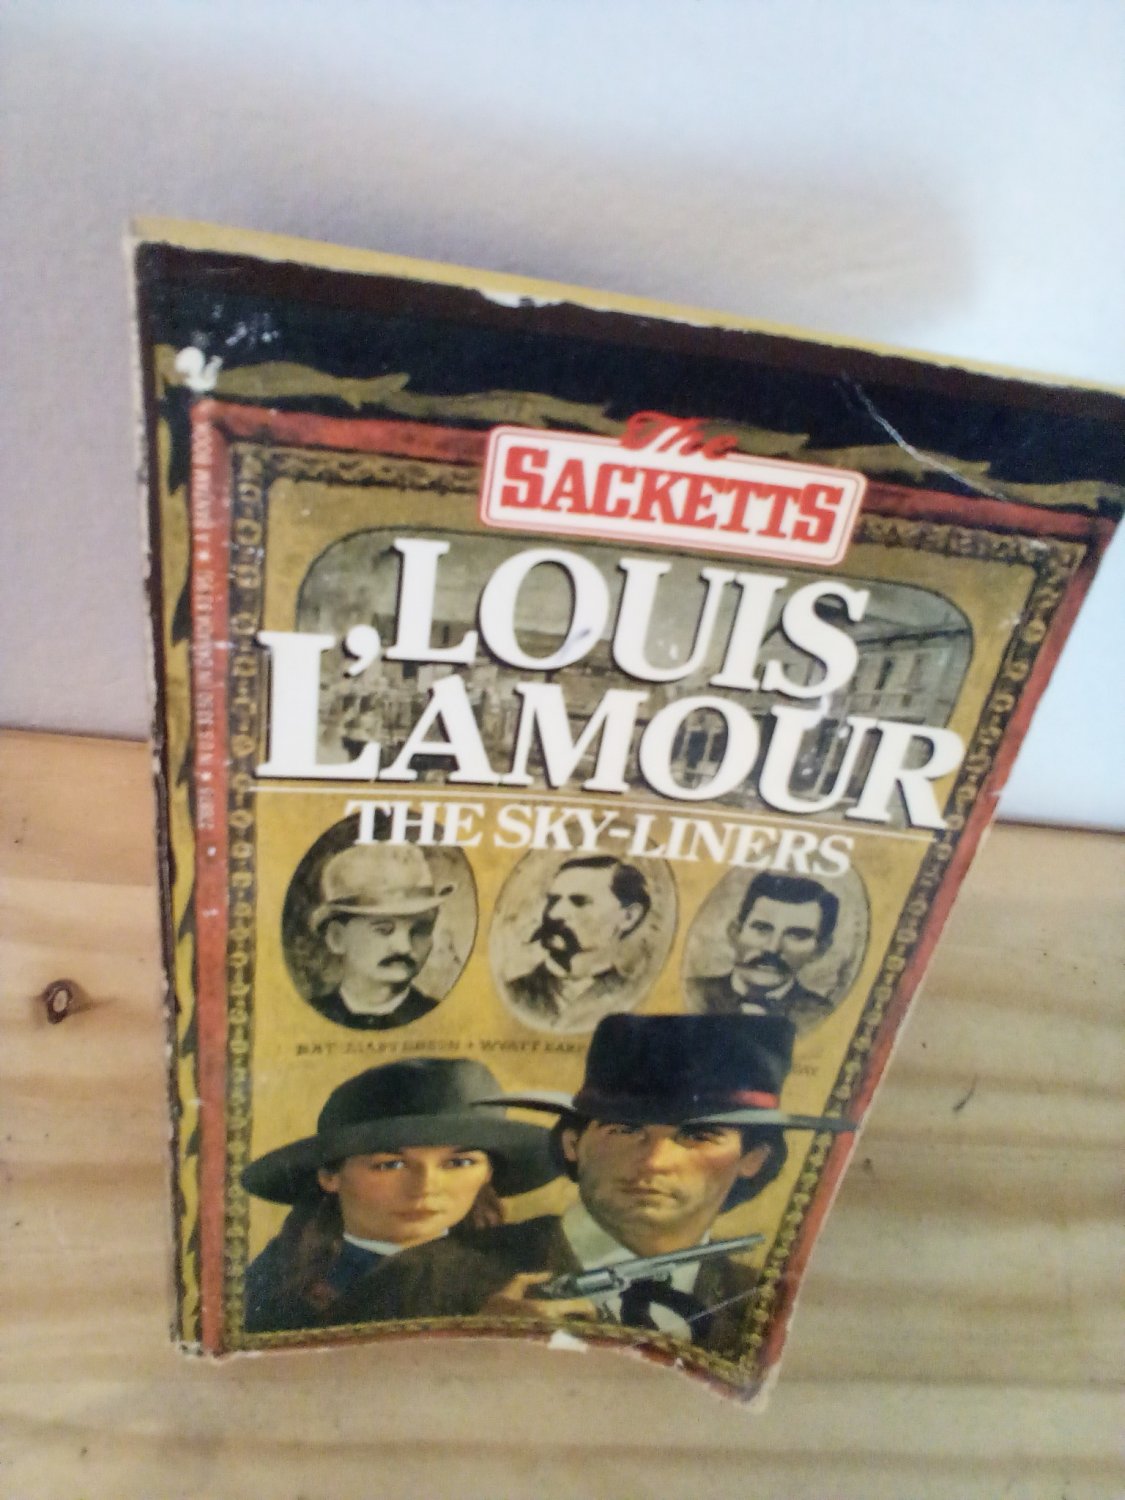 The Sky-Liners (The Sacketts) by Louis L'Amour (Paperback-1988)